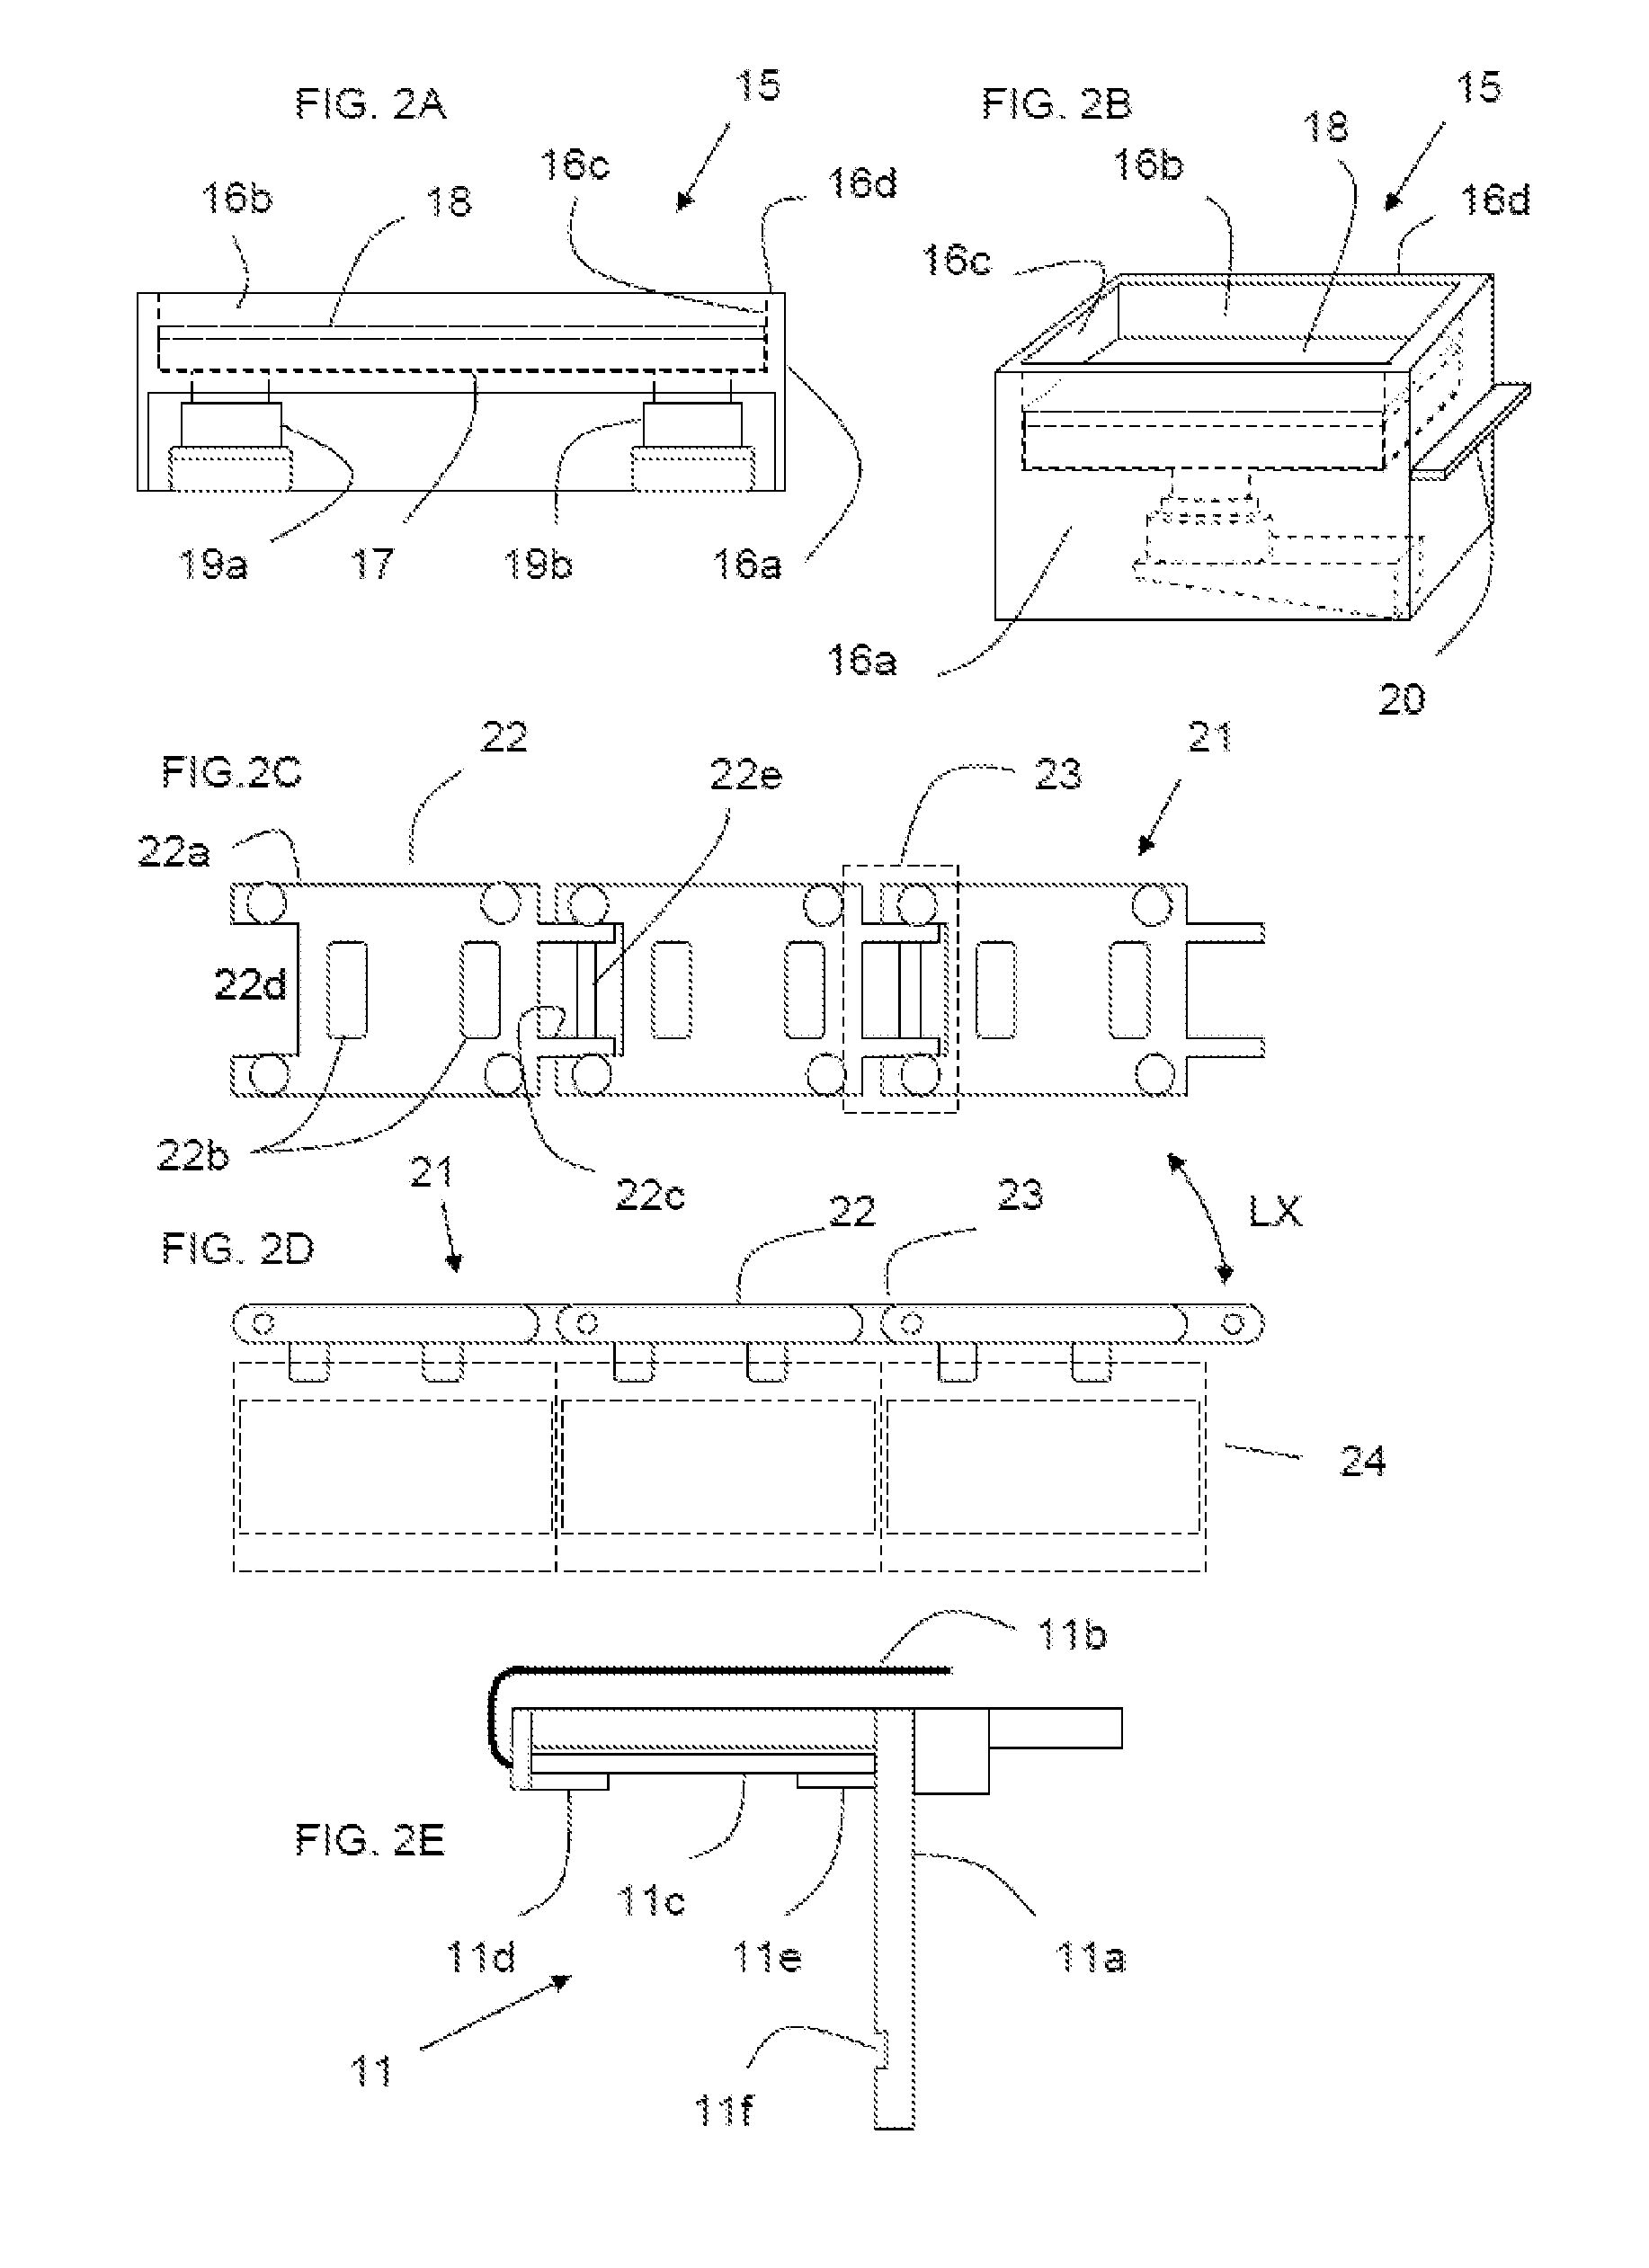 Three-dimensional Printing System and Equipment Assembly